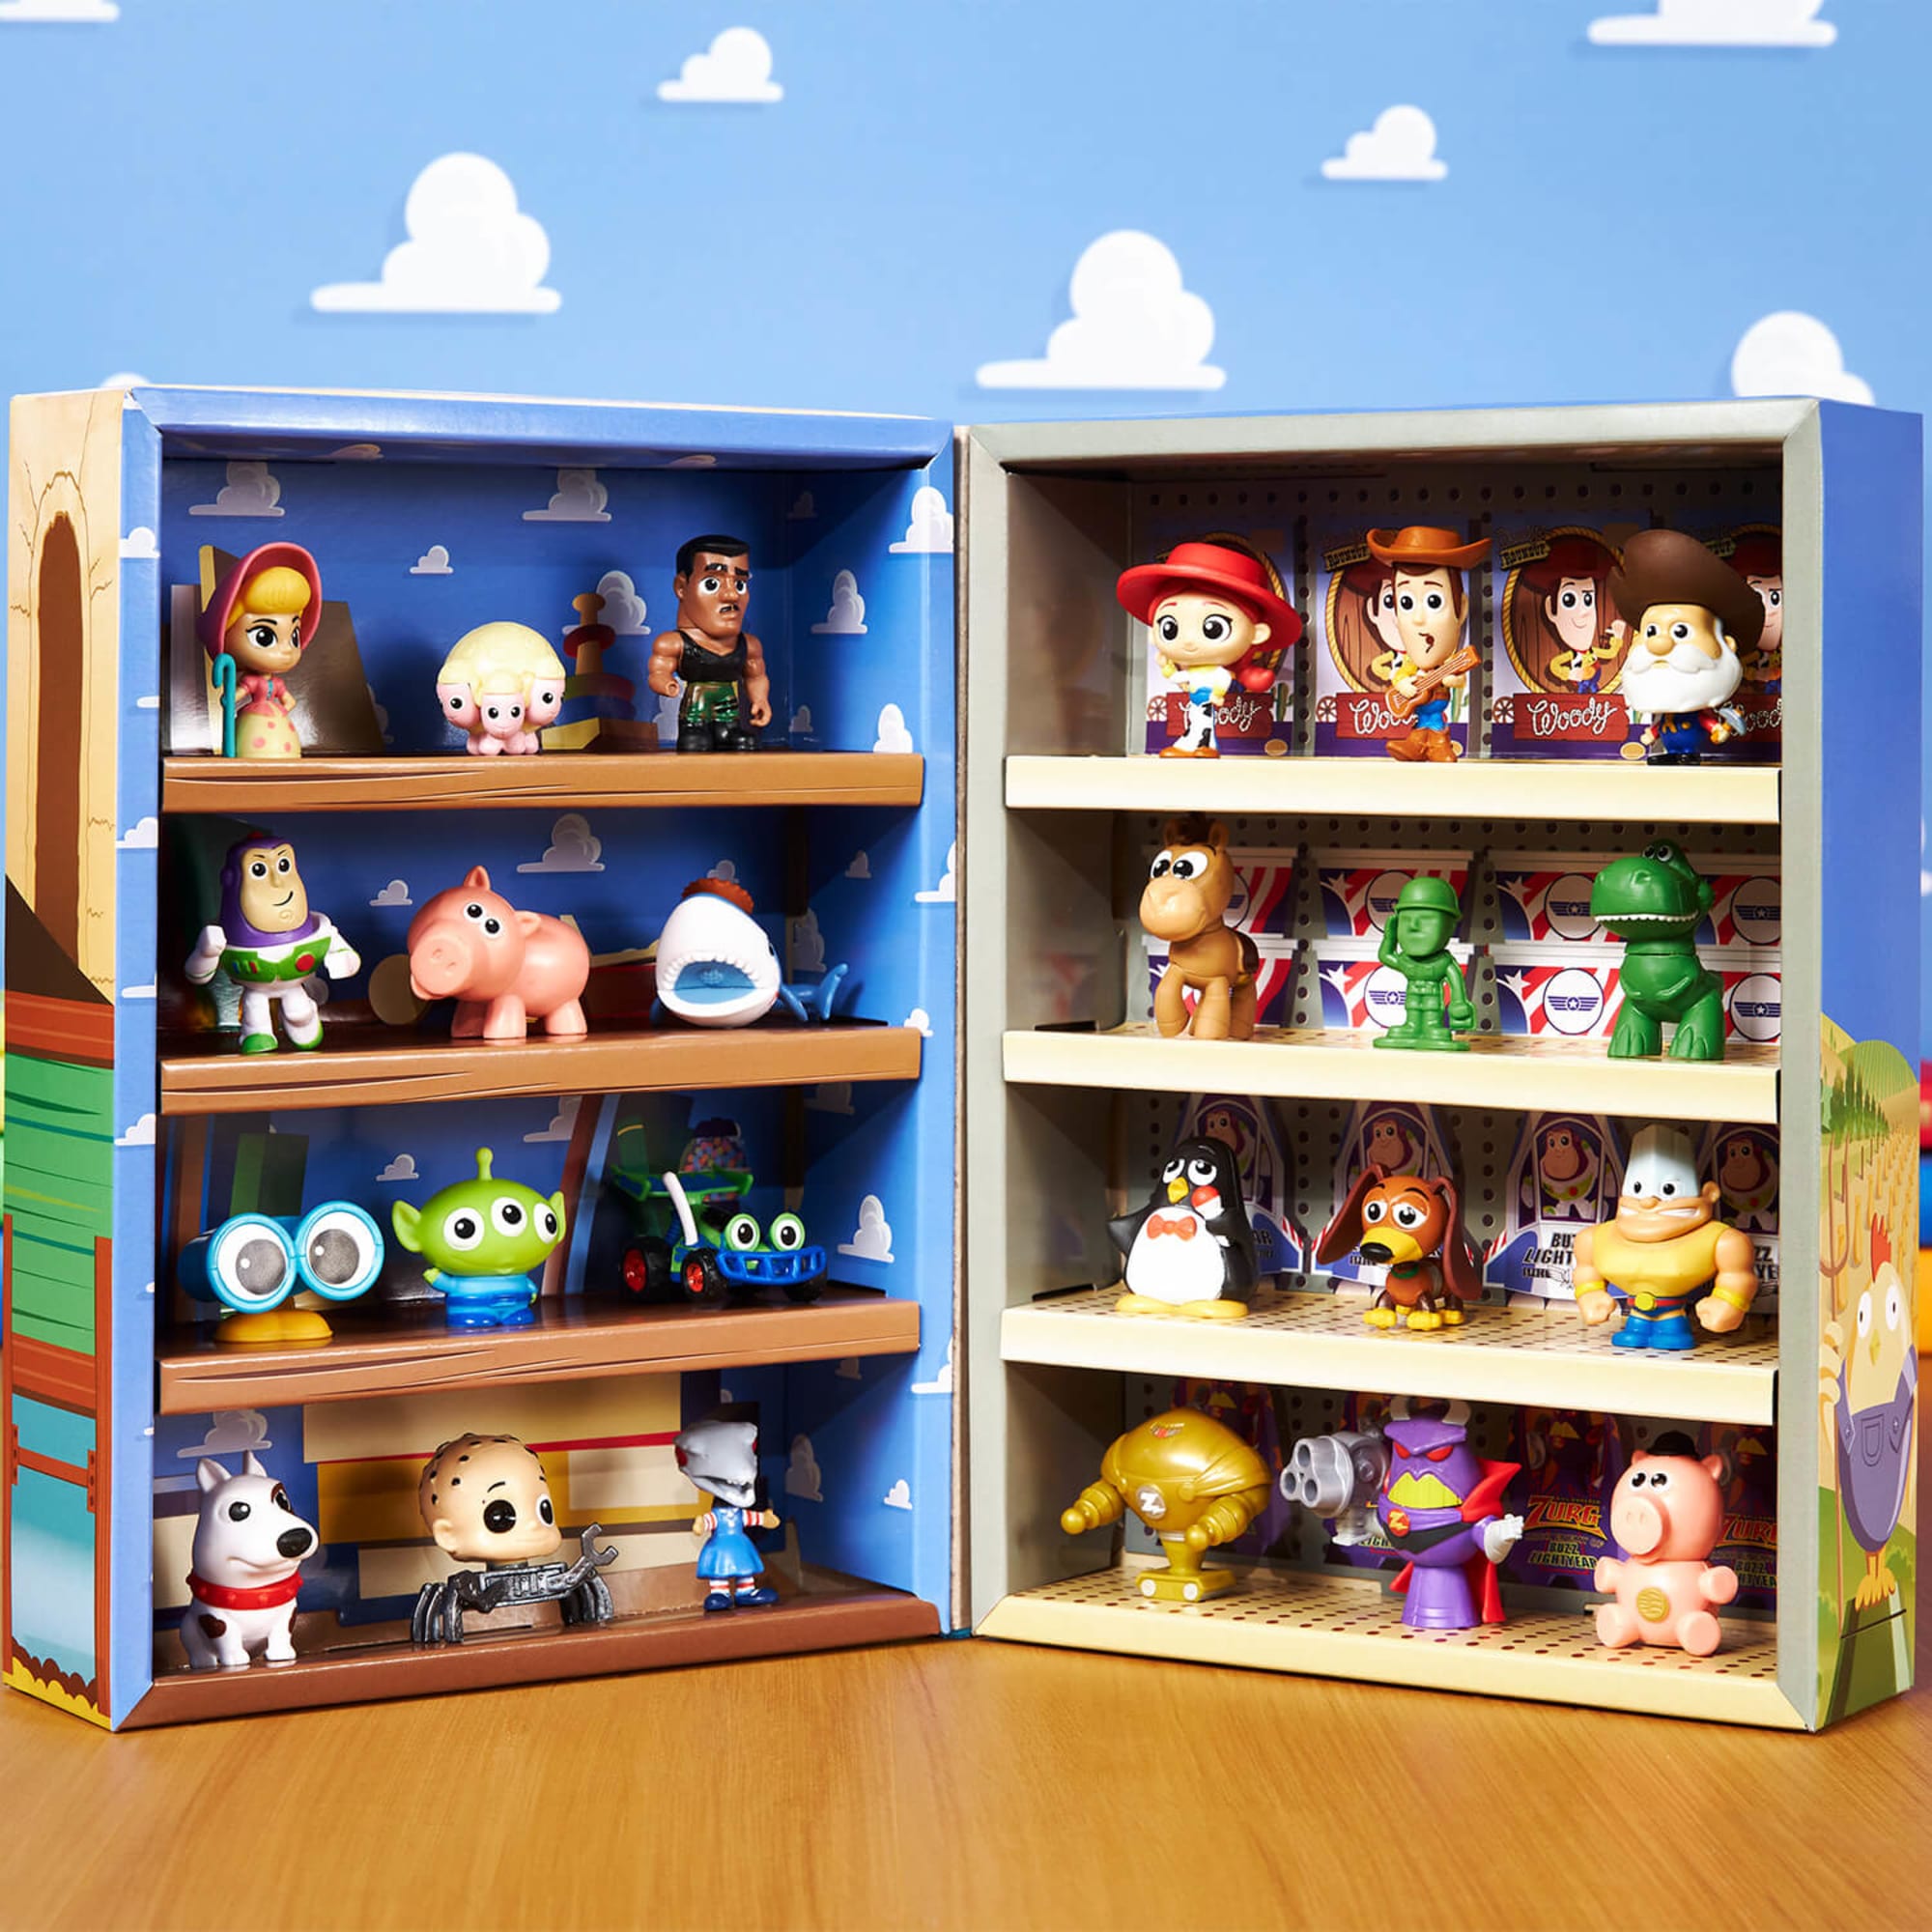 Disney Toy Story 4 Ultimate Gift Pack Includes 7-Characters 